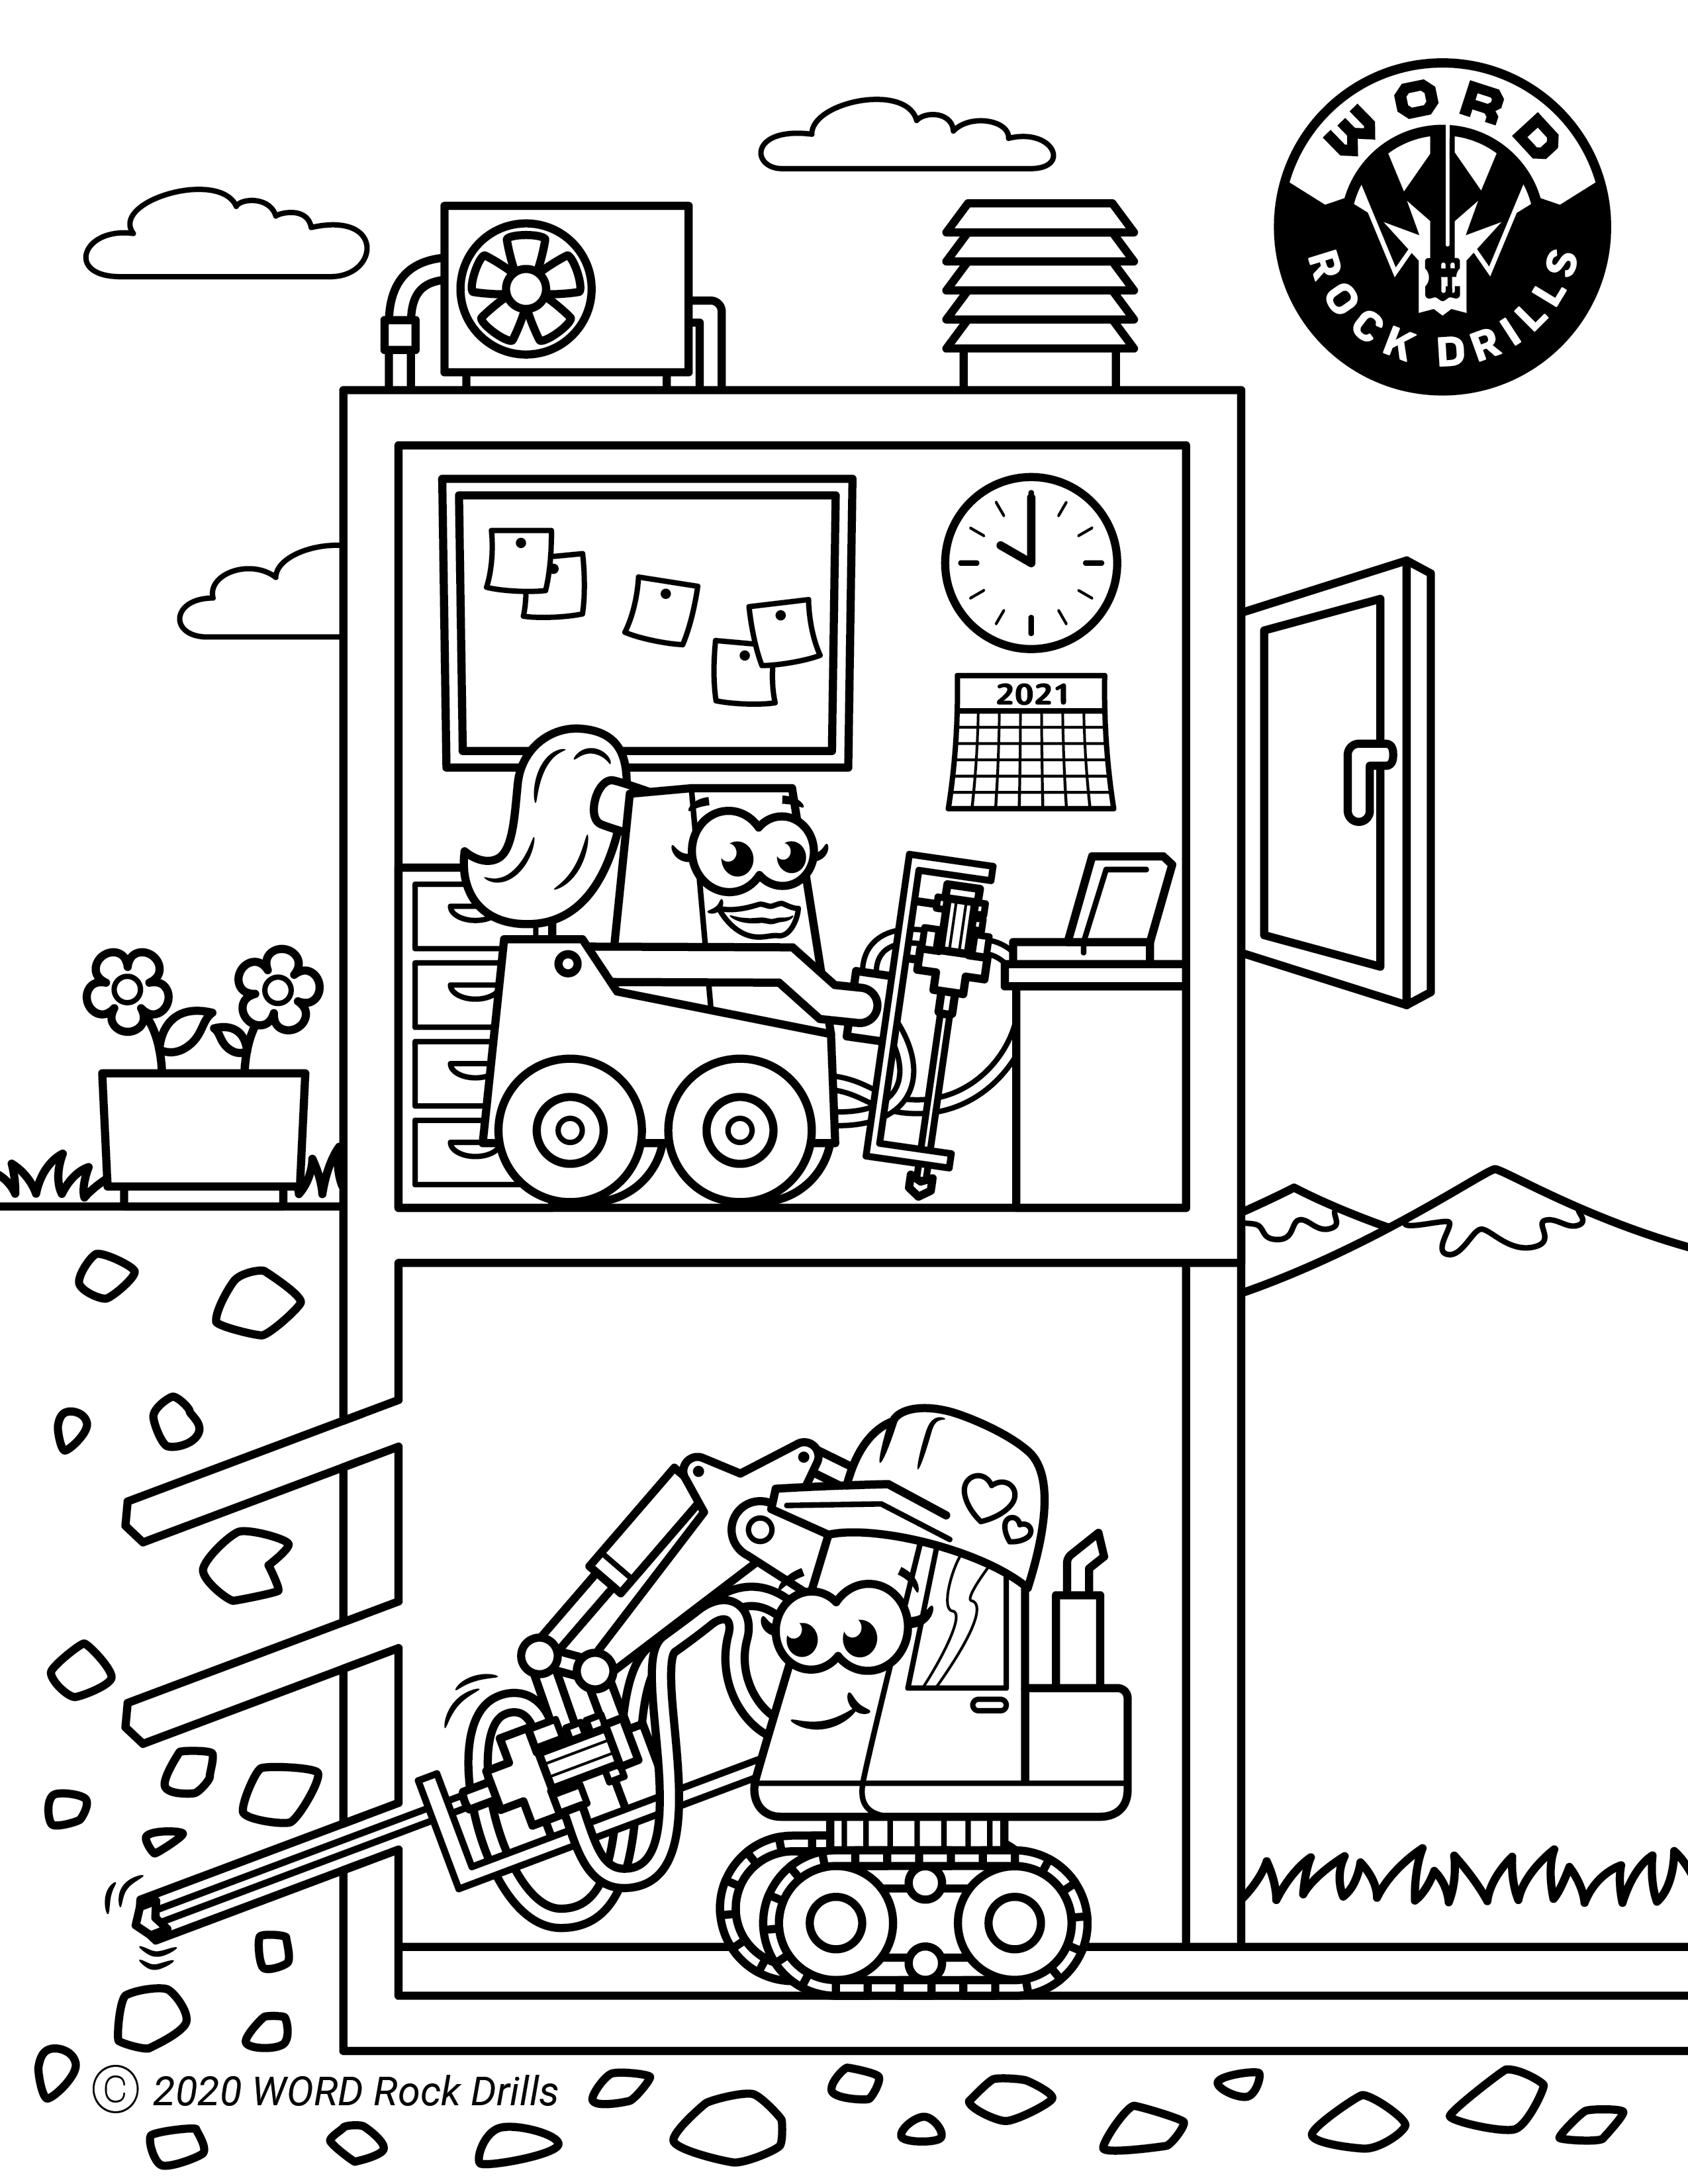 Free Rock Drill Coloring Pages to Pass the Time   WORD Rock Drills